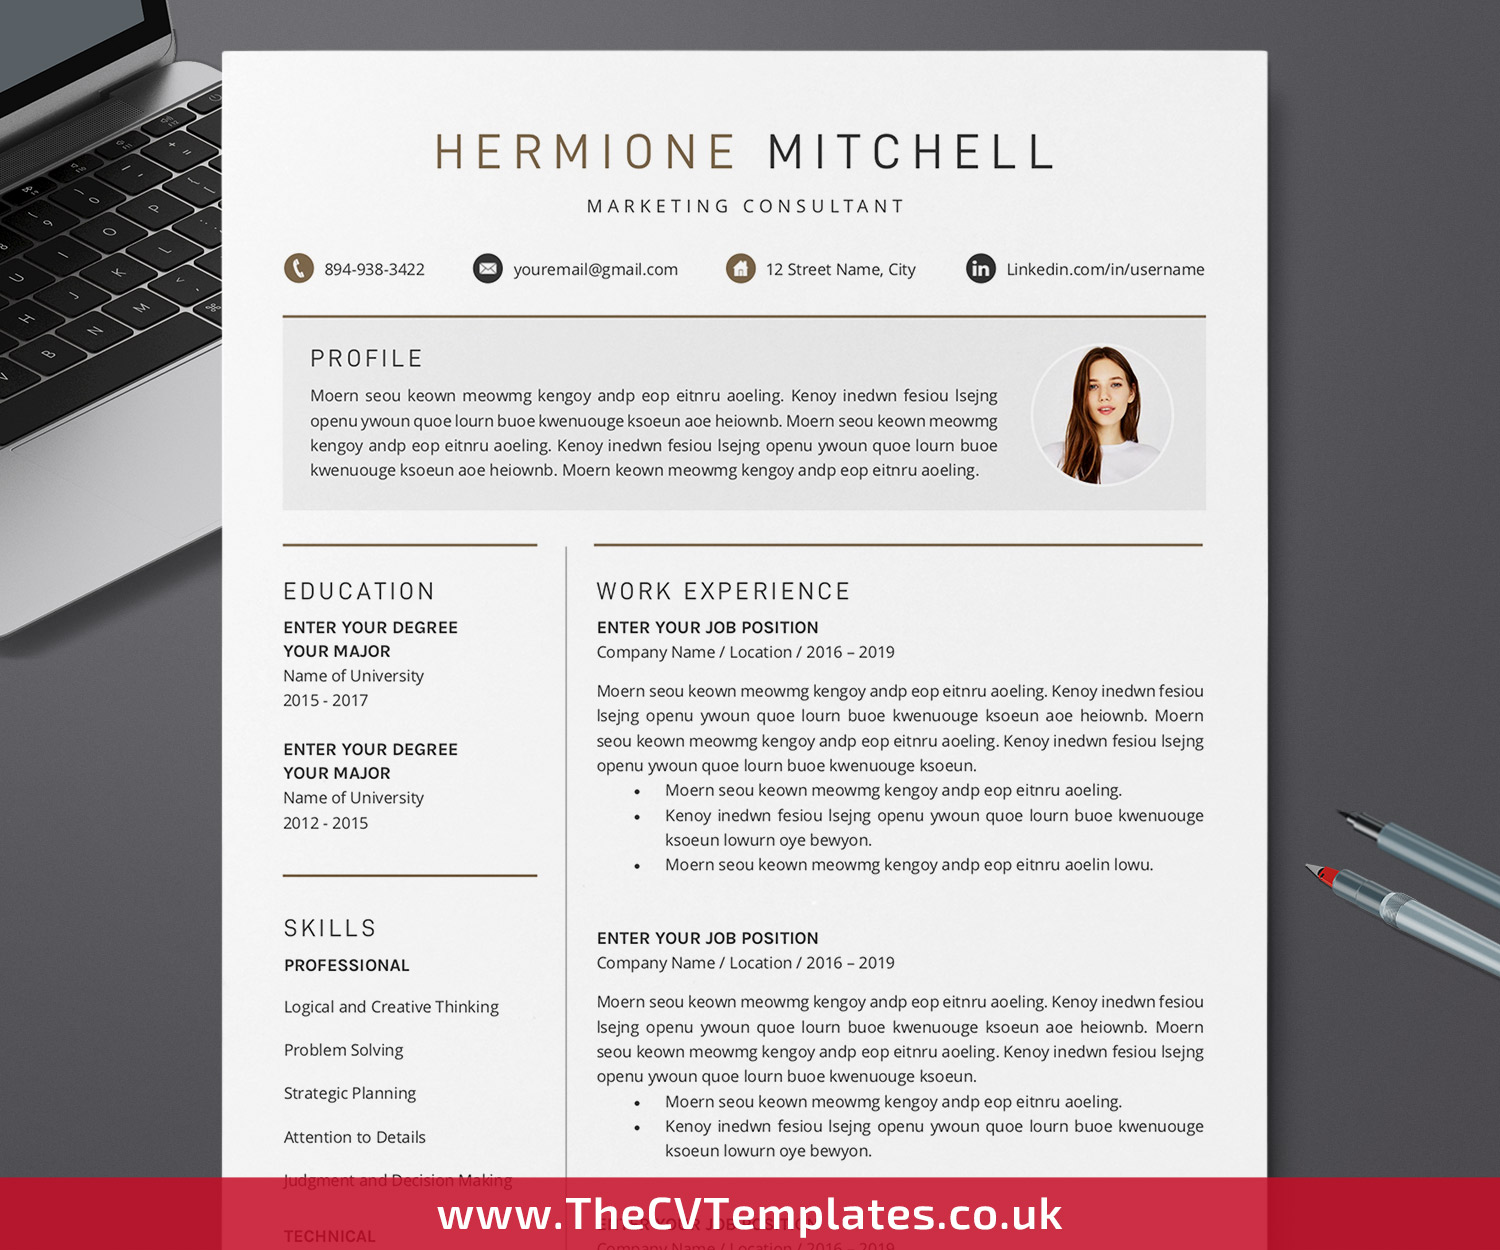 www.thecvtemplates.co_.uk-Professional-CV-Template-for-MS-Word-Cover-Letter-Simple-Resume-Format-Minimalist-Resume-Modern-Resume-Creative-Resume-Editable-Resume-for-Job-38-1 The Hollistic Aproach To resume